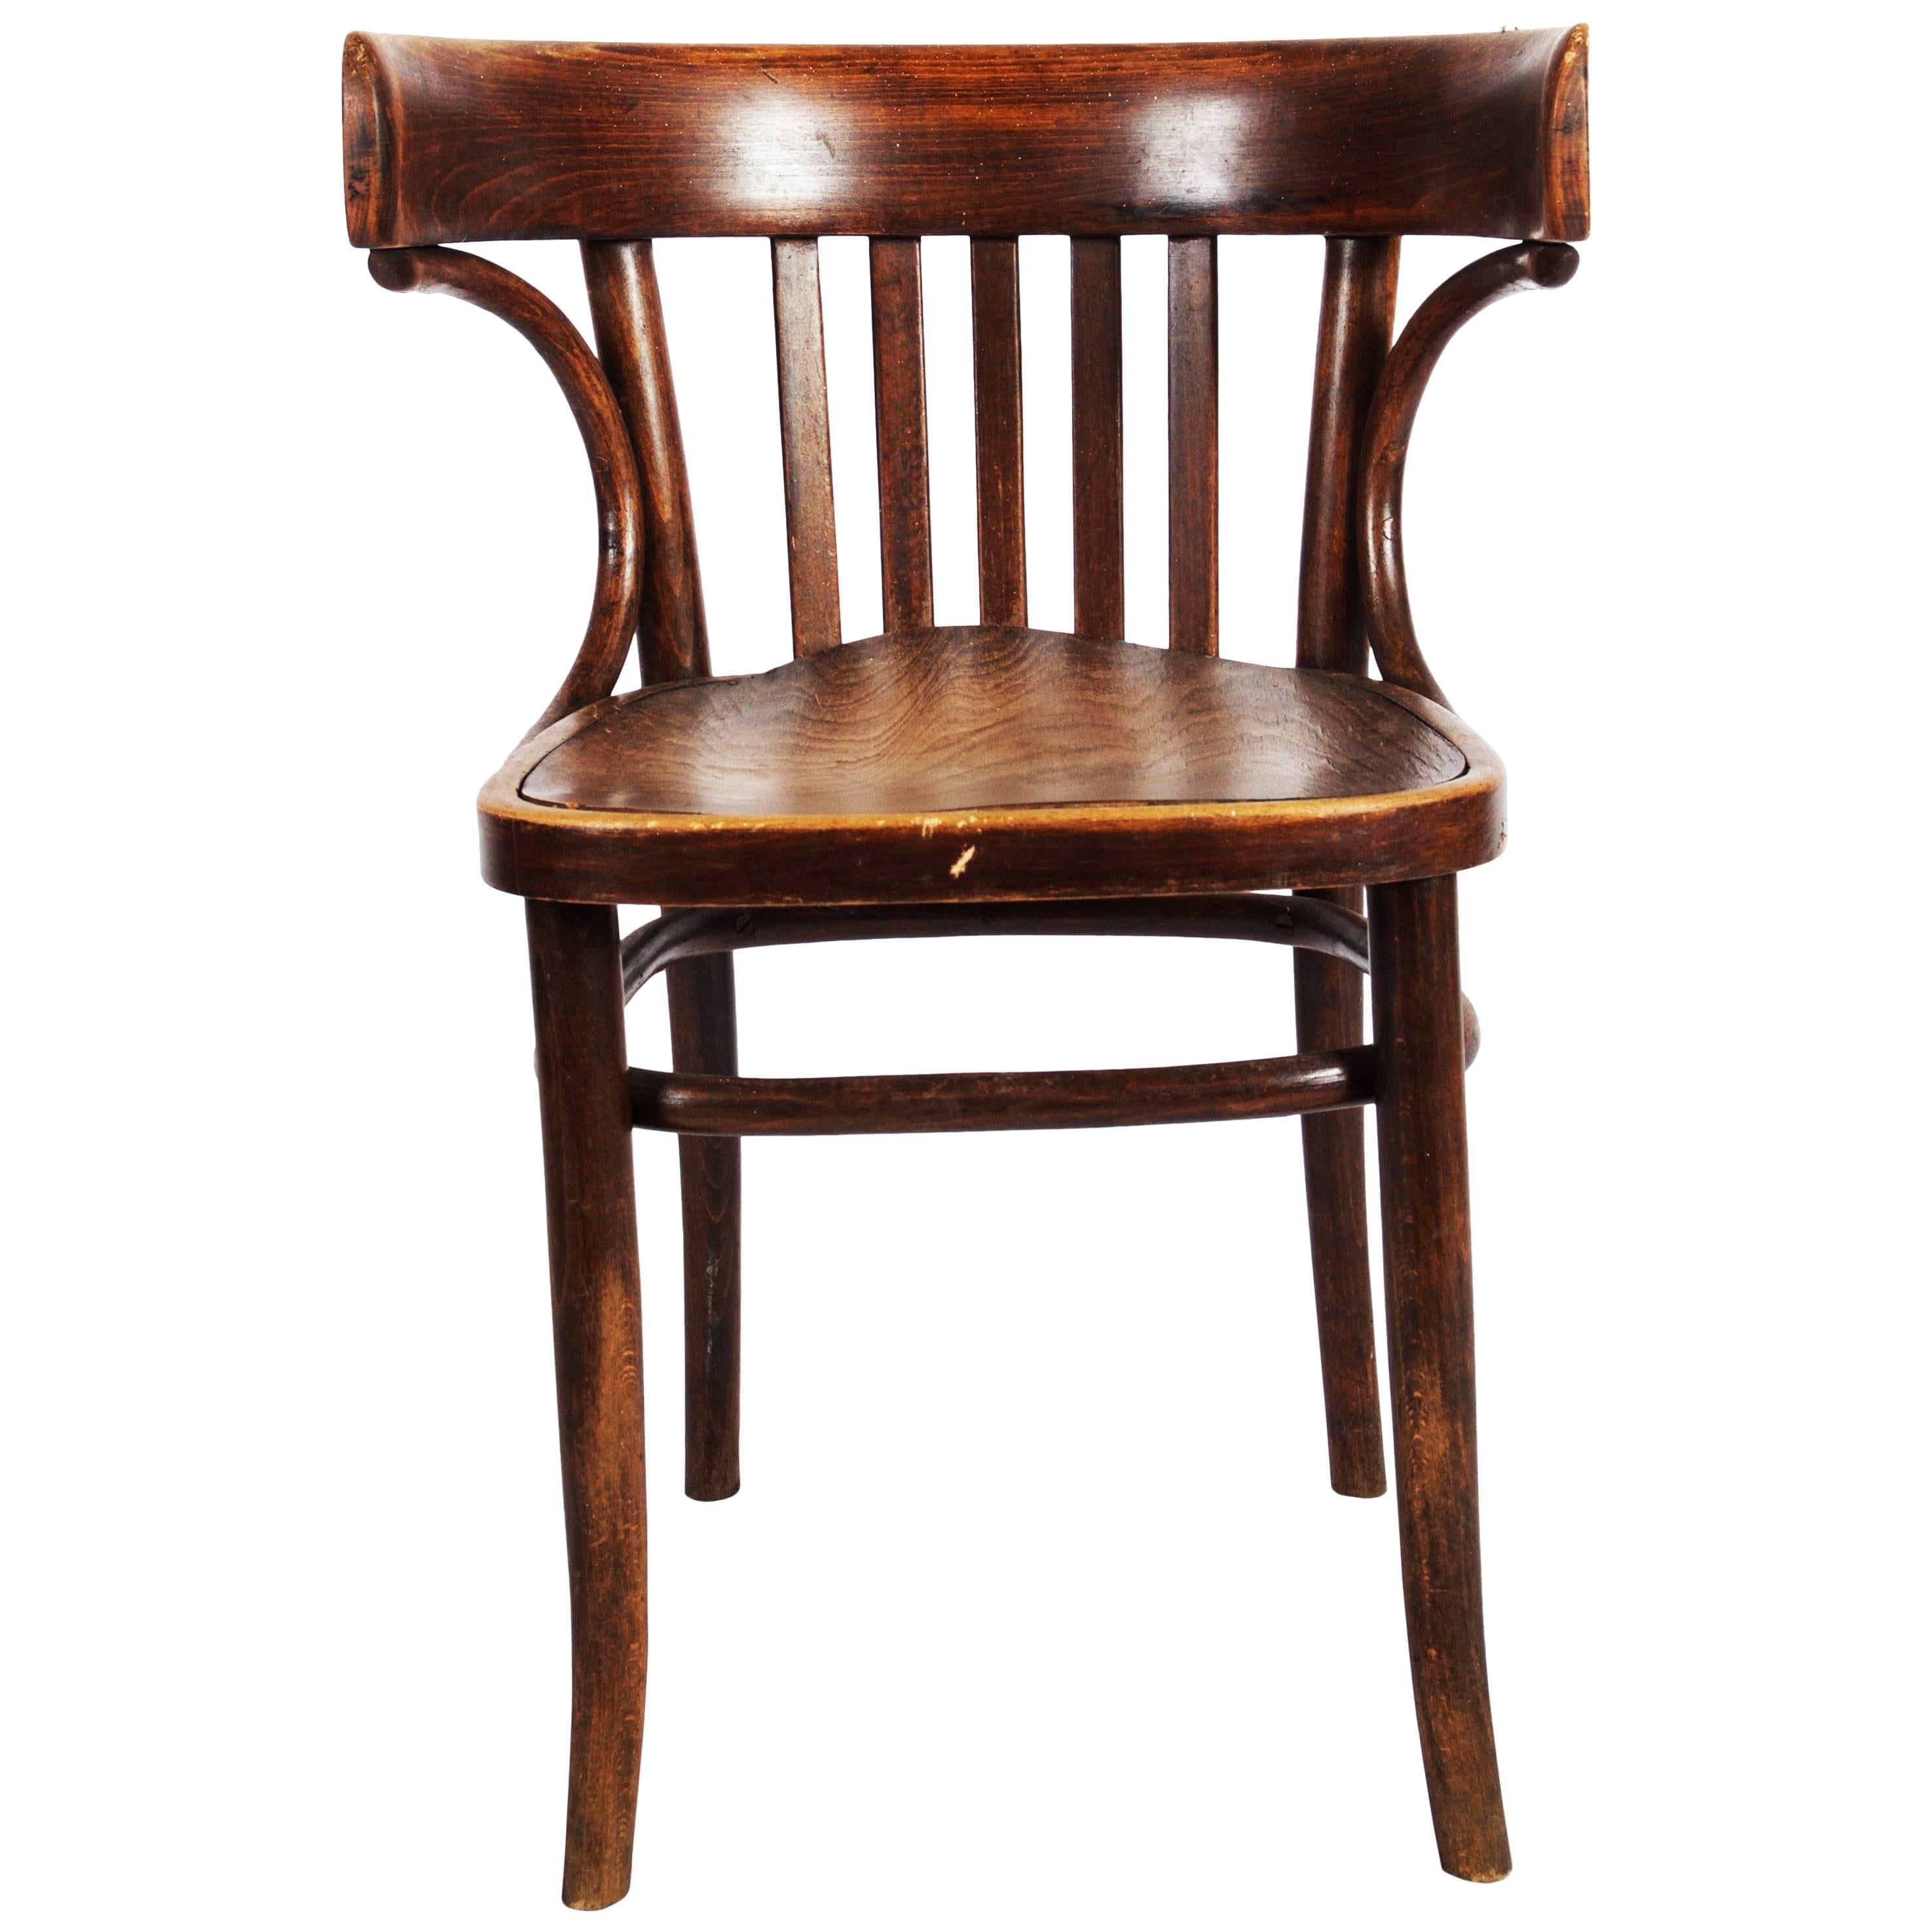 Classical Thonet Bistro or Cafe Armchair, 1920s